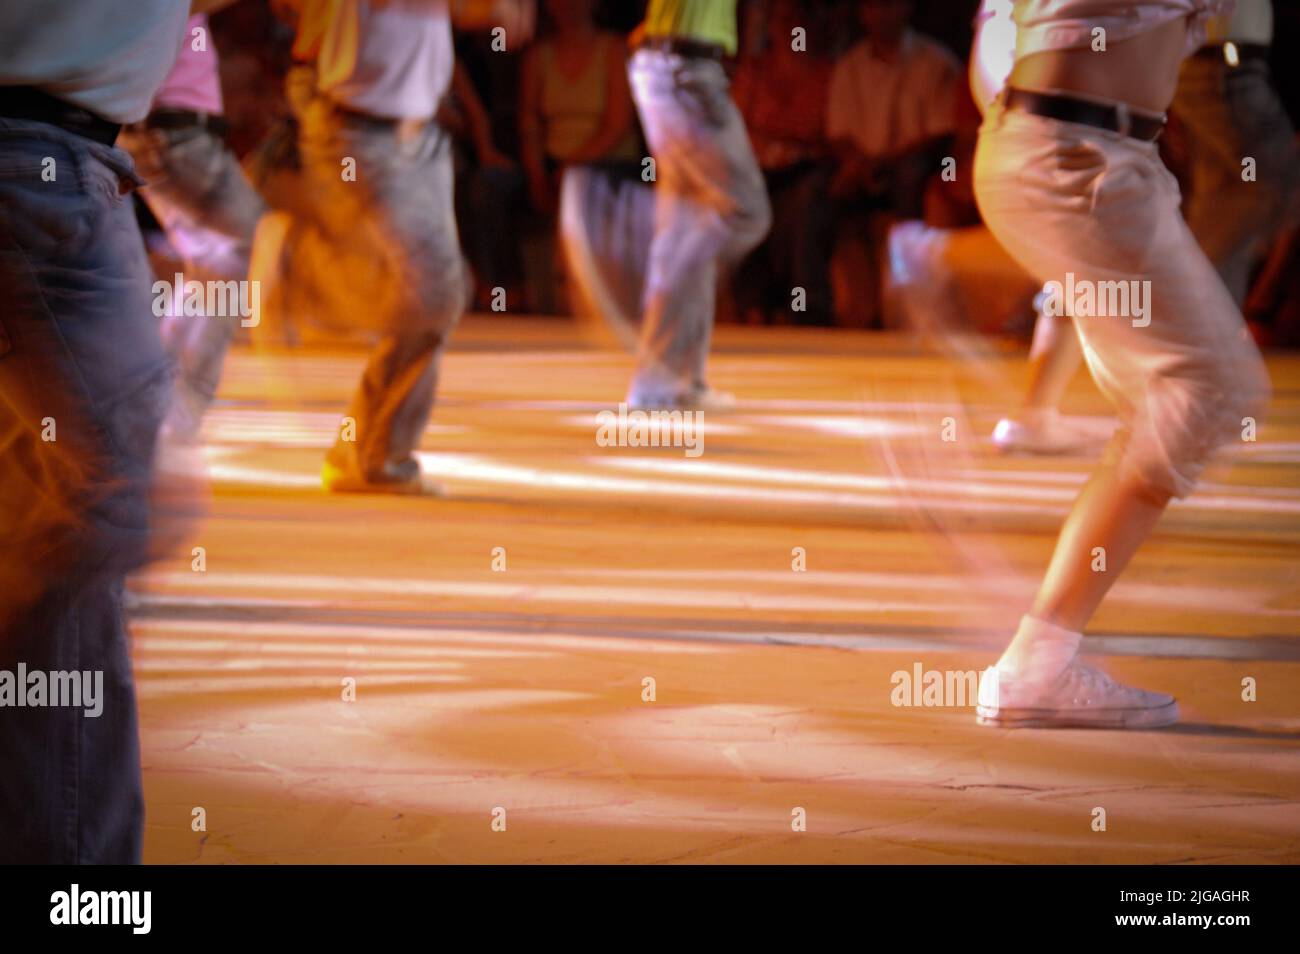 Unrecognized group of teenagers dancing on a stage. Blurred motion of dancers Stock Photo